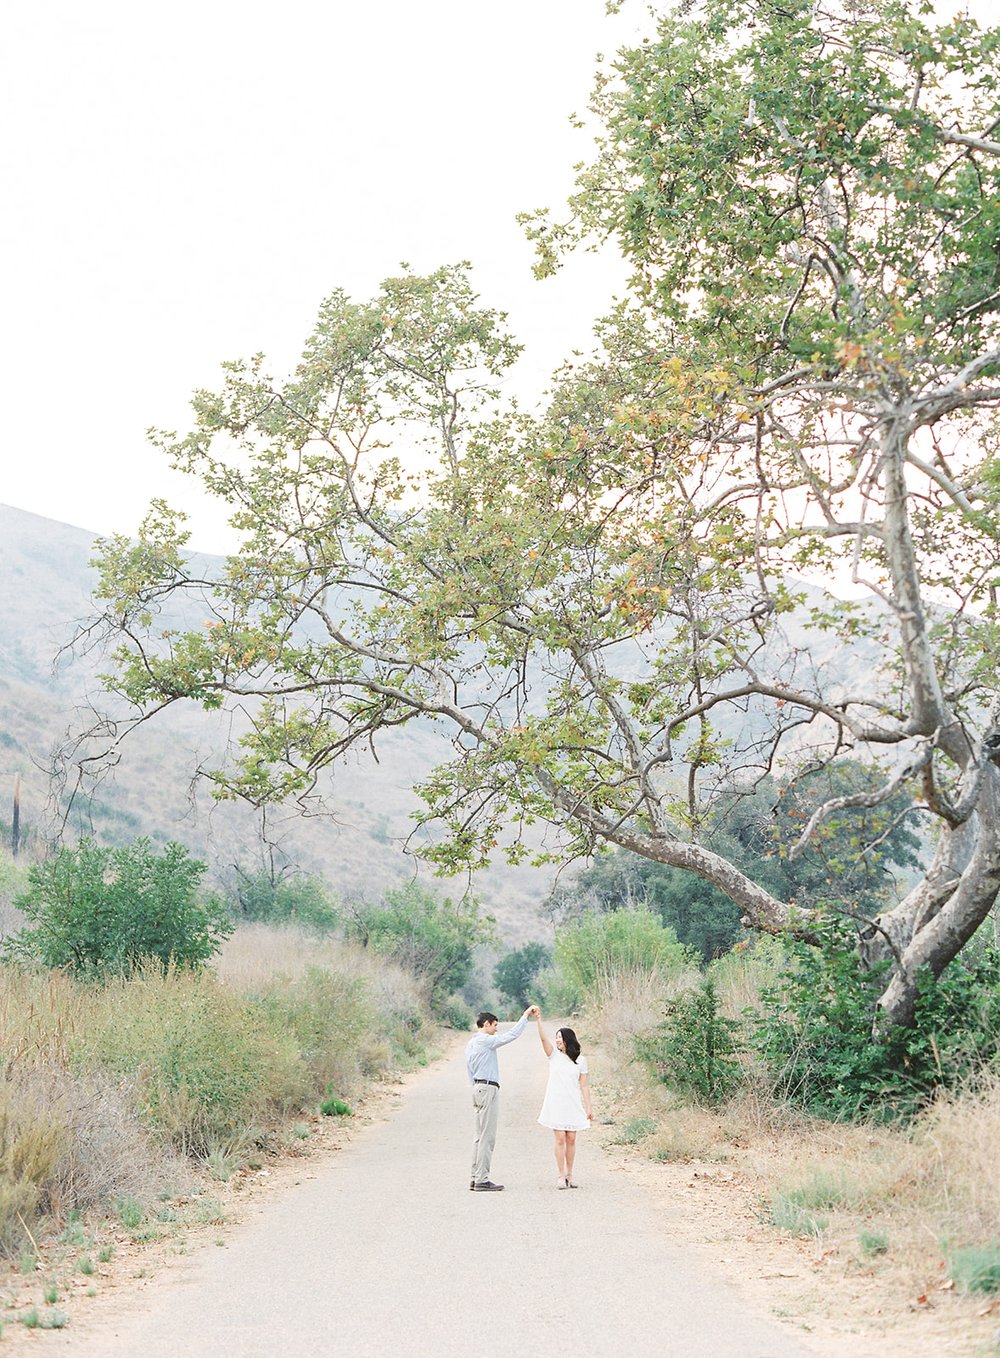 Danielle_Bacon_Photography_Solstice_Canyon_Engagement_47.jpg